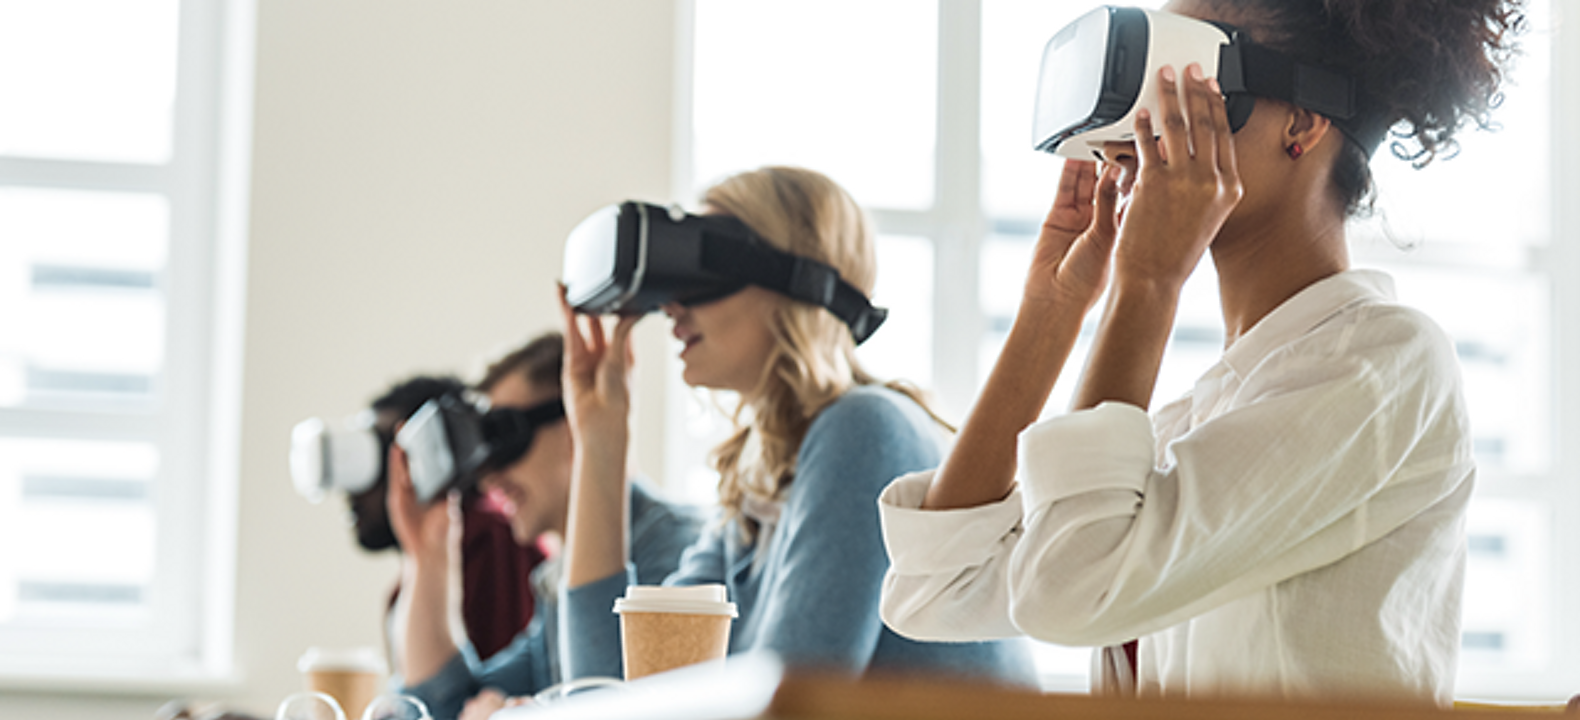 Individuals wear VR glasses in classroom